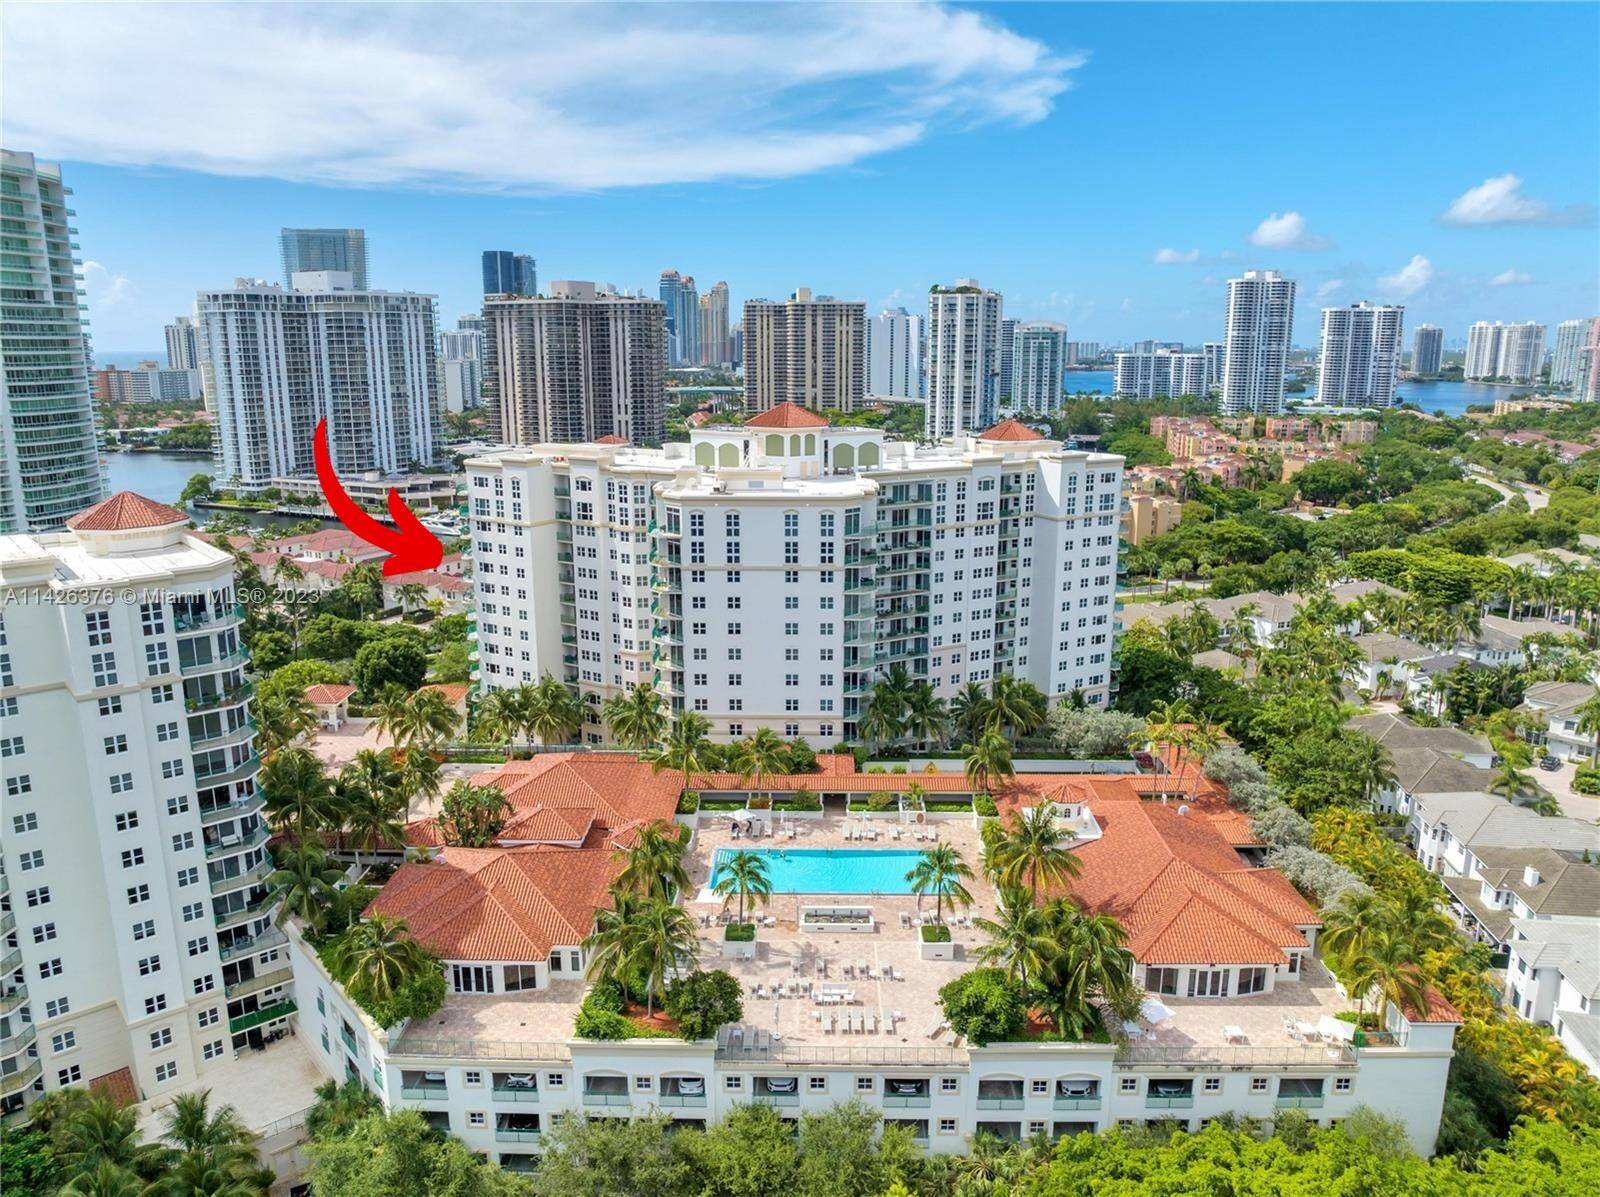 Luxury Apartment in Aventura, 3 large bedrooms, 3 full baths, smart mirrors, renovated closets, balcony w ocean view, SS Kitchen appliances, wood cabinets, granite countertops, washer dryer, hurricane impact windows, ...